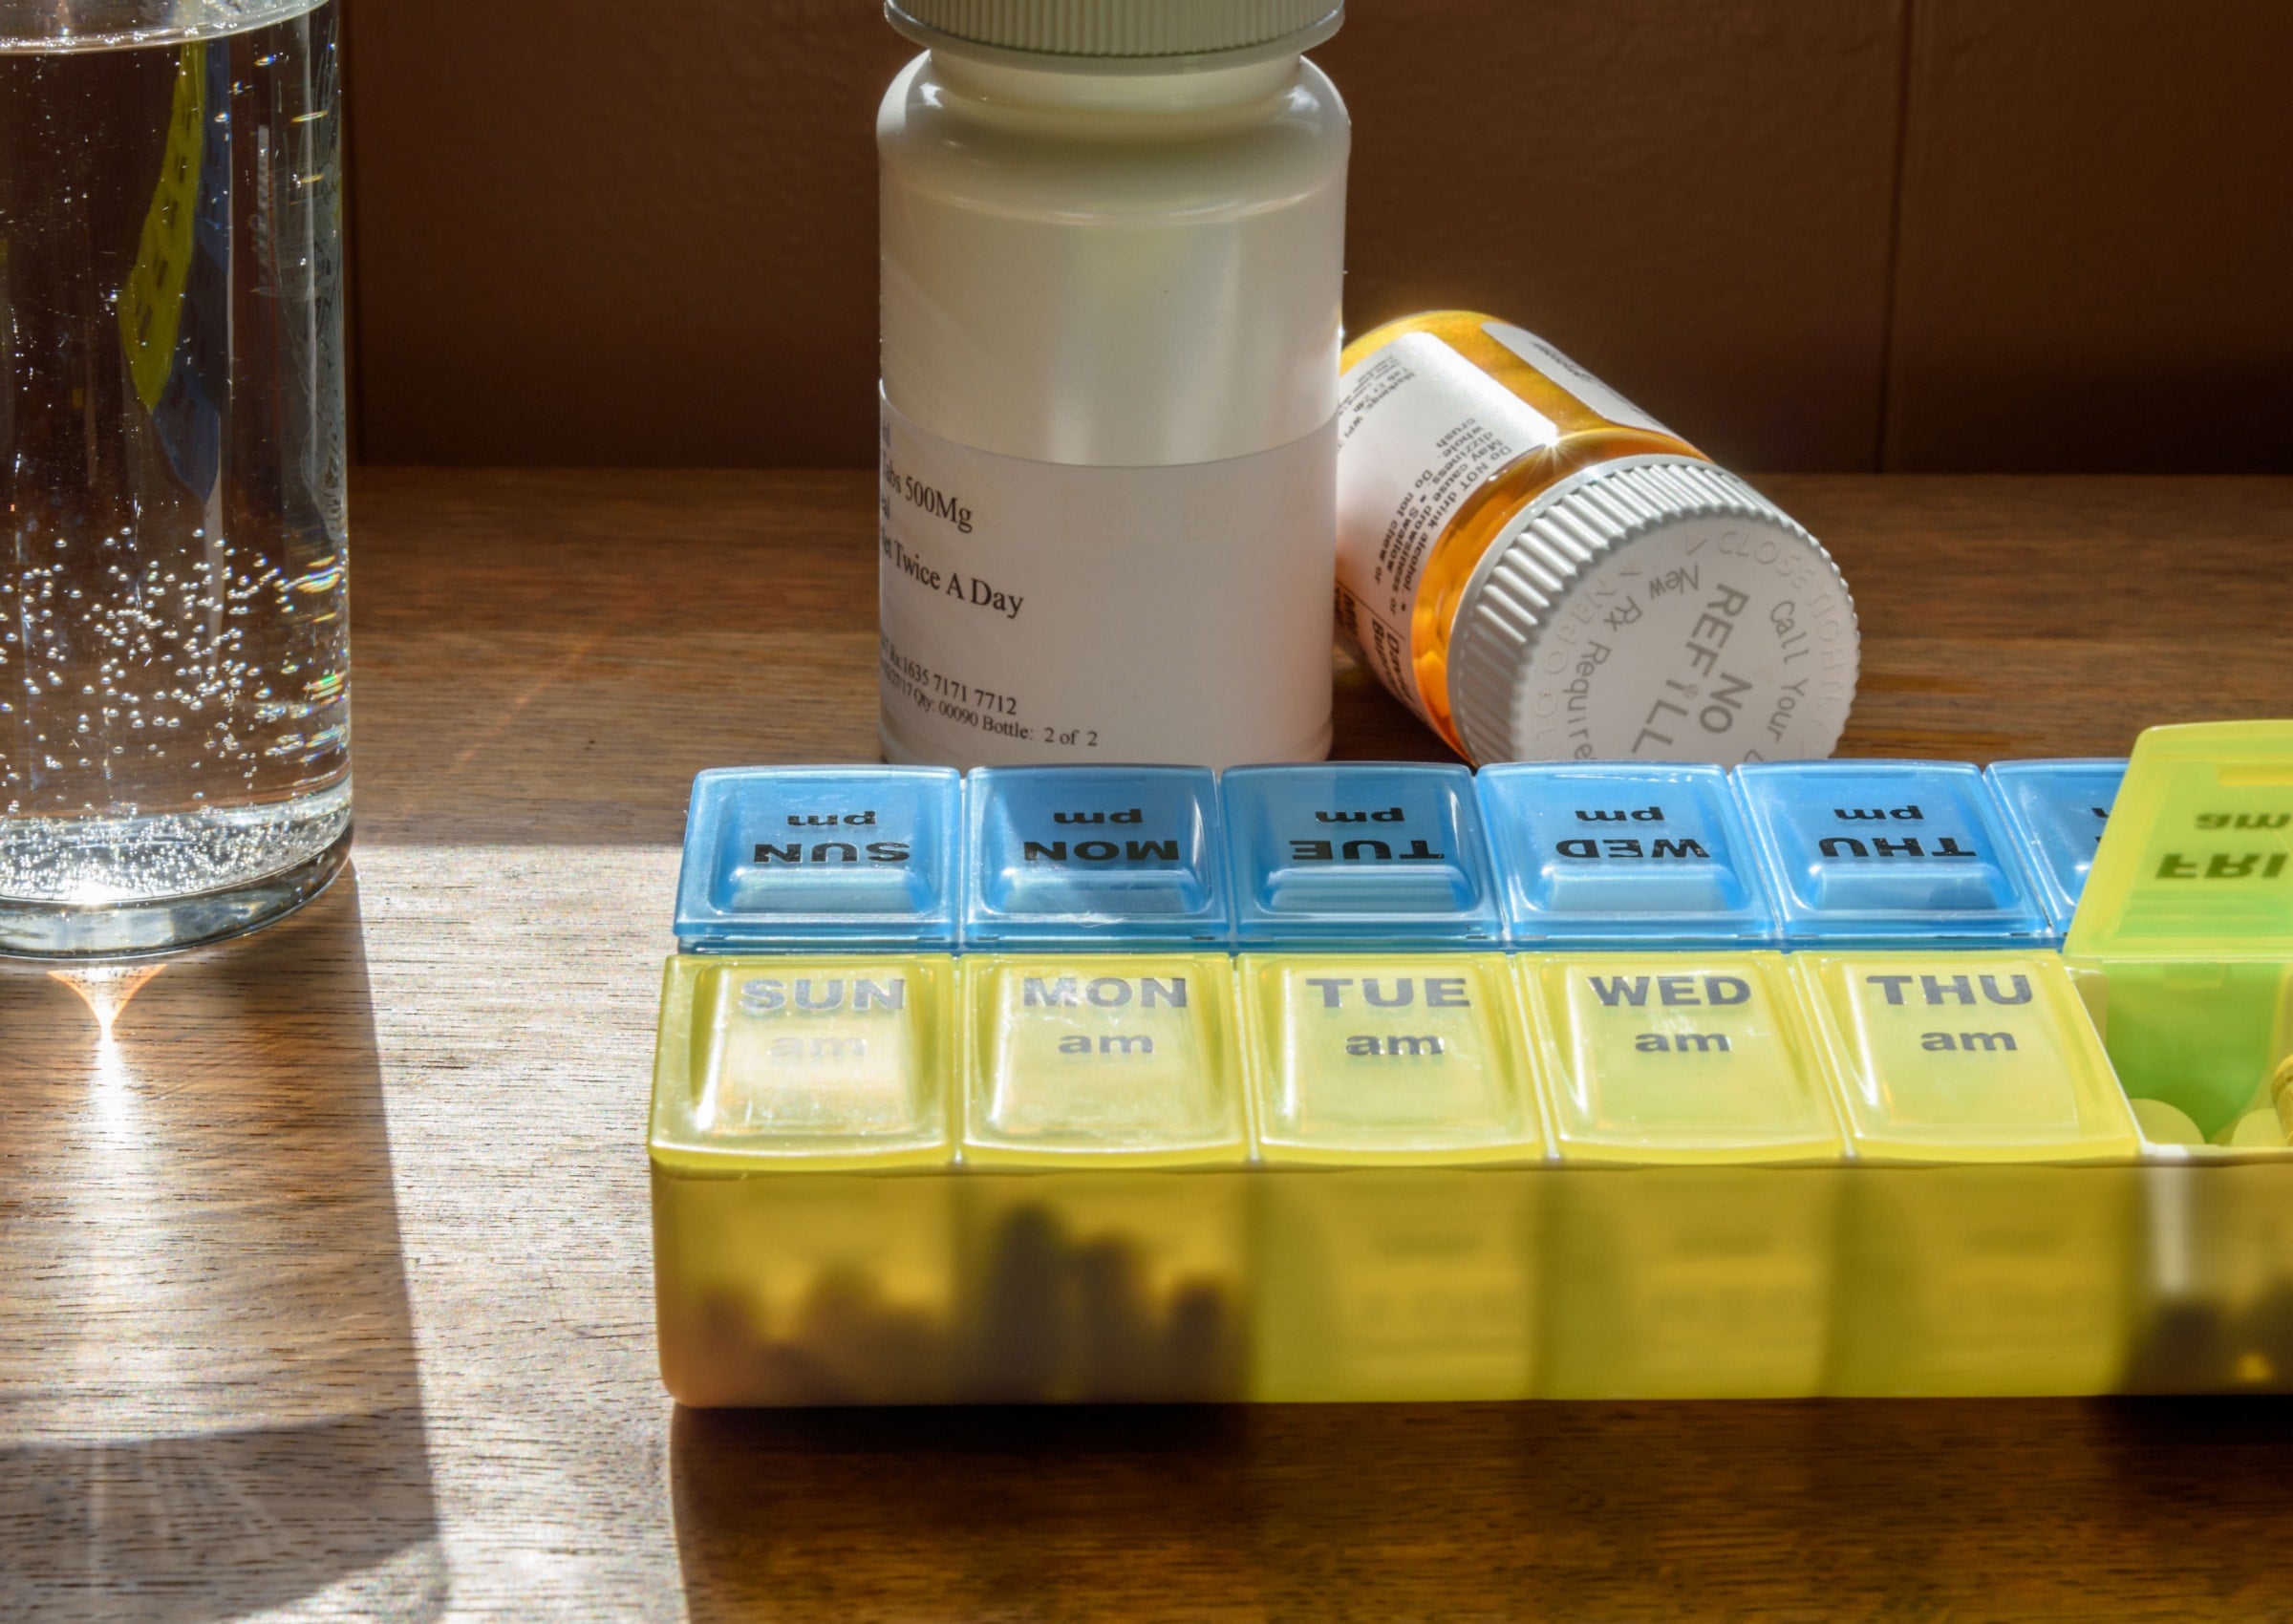 using weekly pill containers help patients to adhere to medication schedules